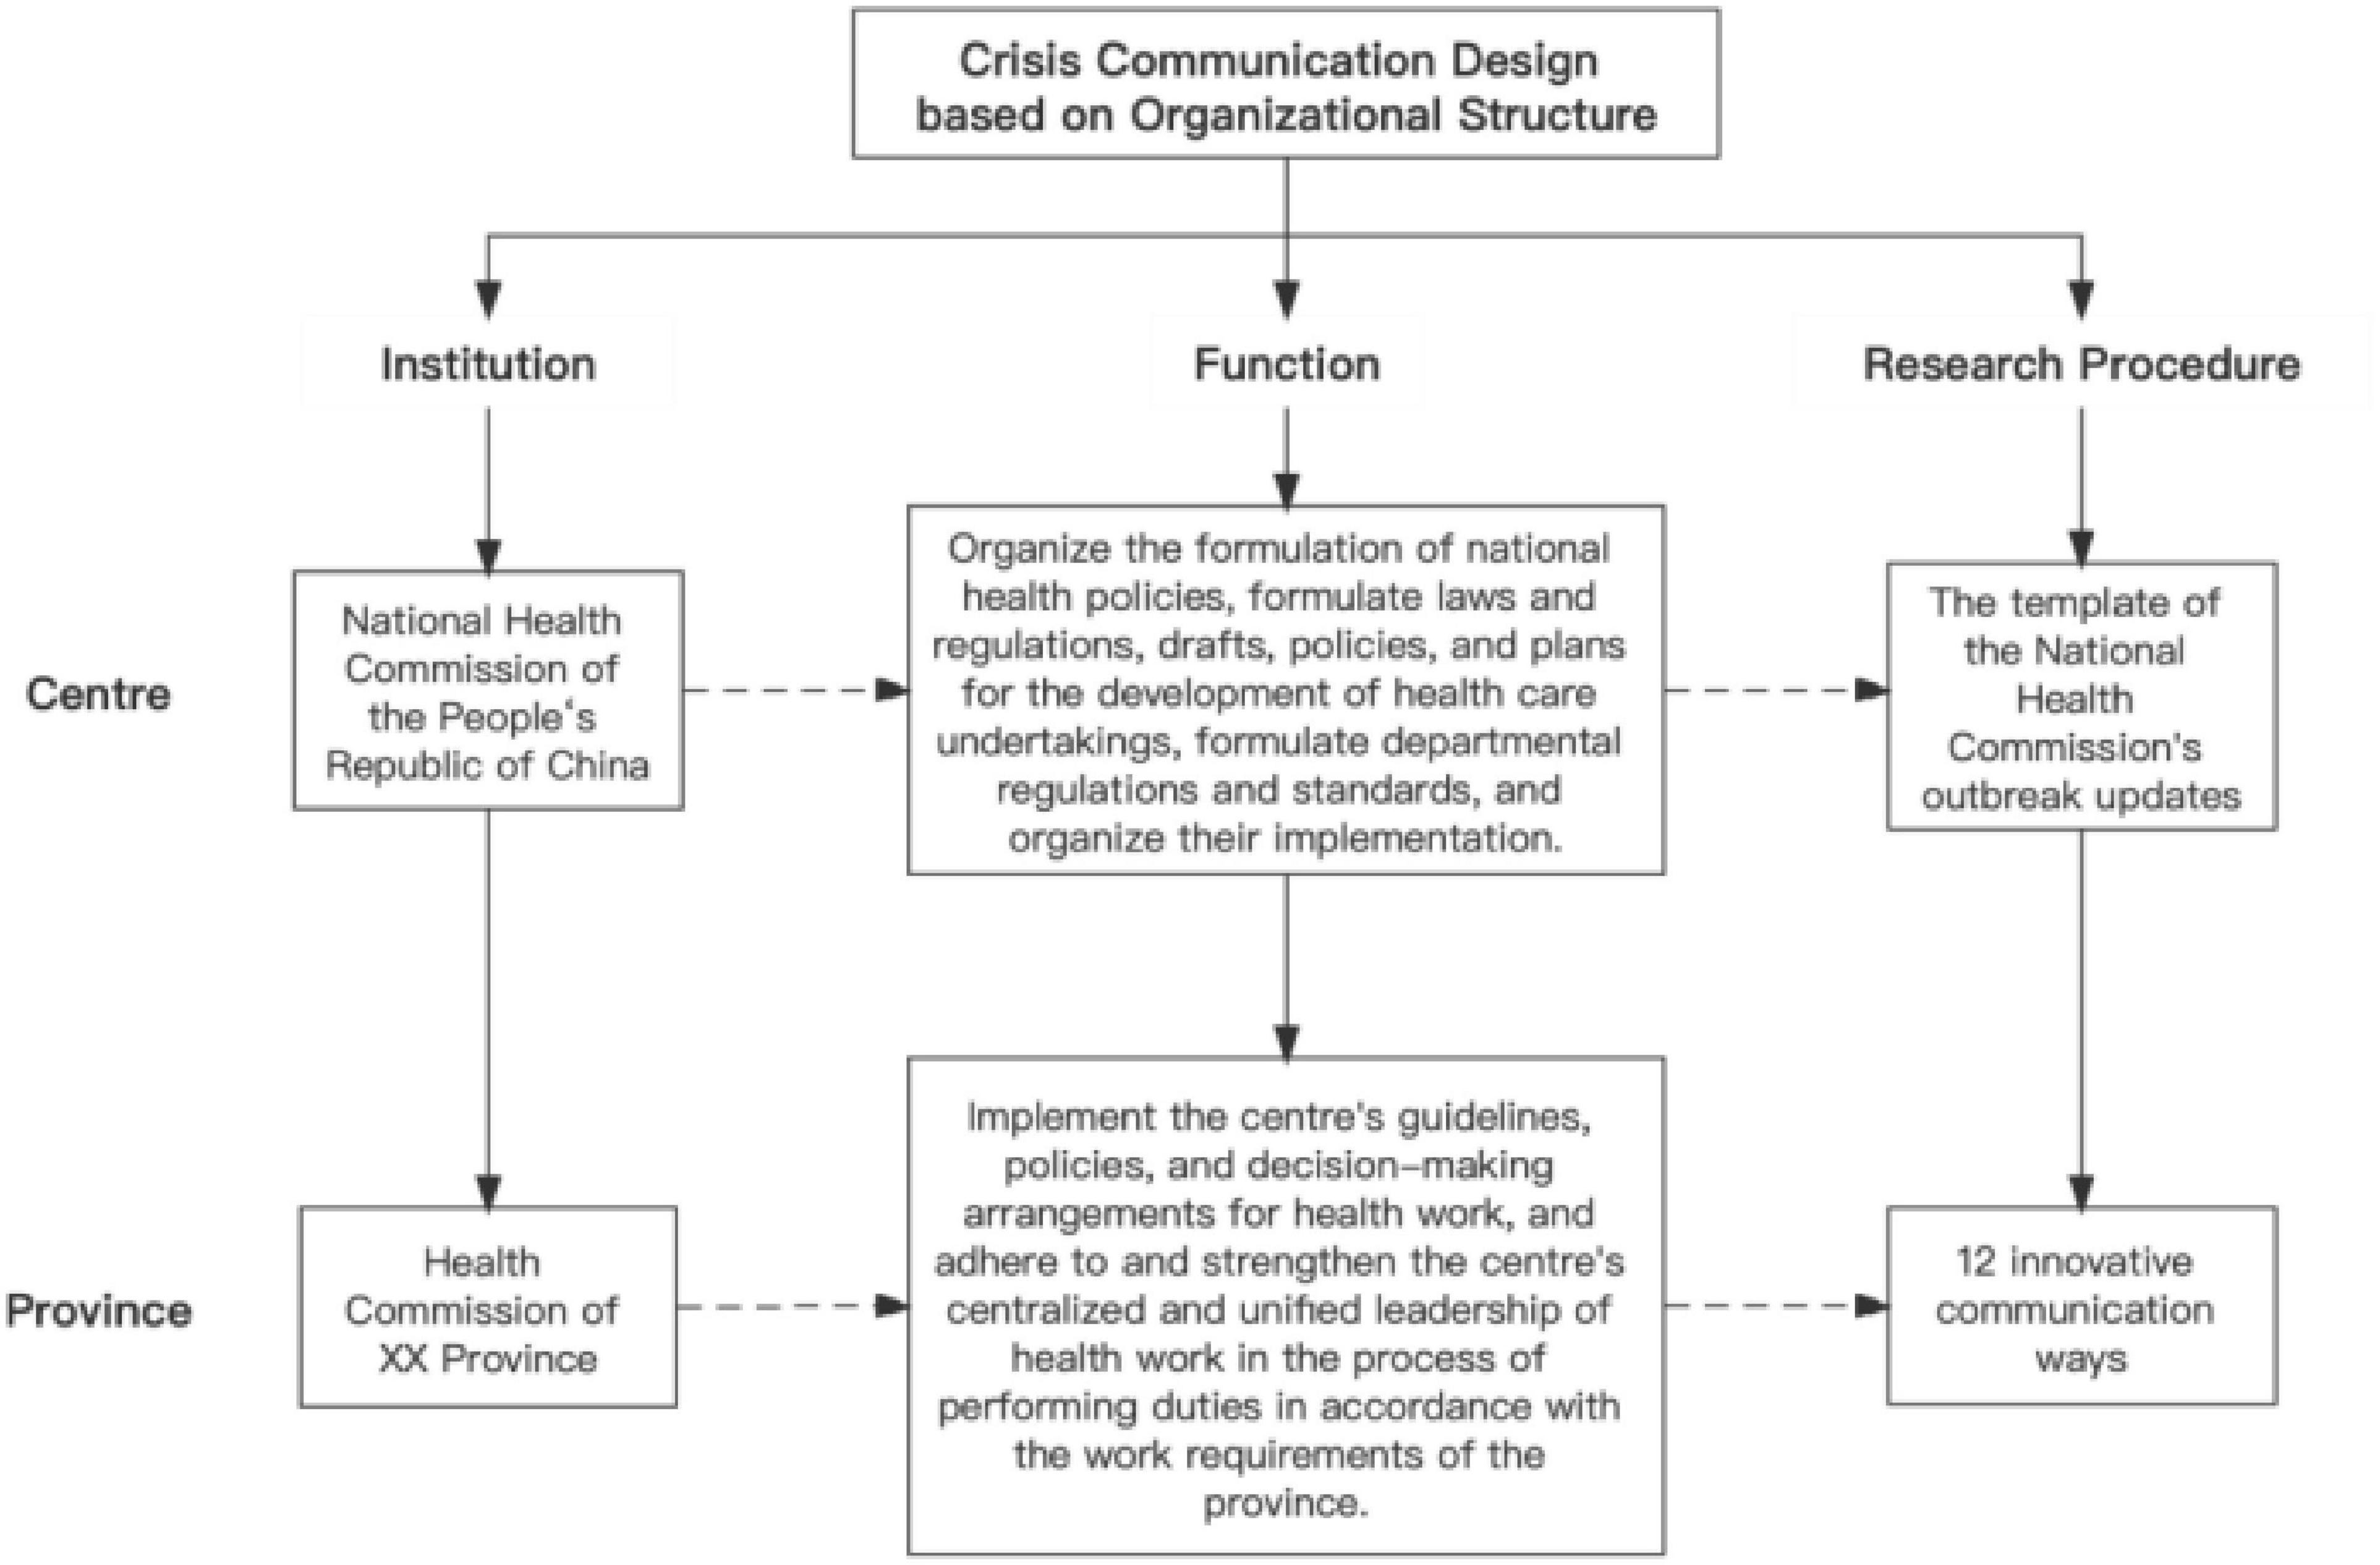 Government crisis communication innovation and its psychological intervention coupling: Based on an analysis of China’s provincial COVID-19 outbreak updates